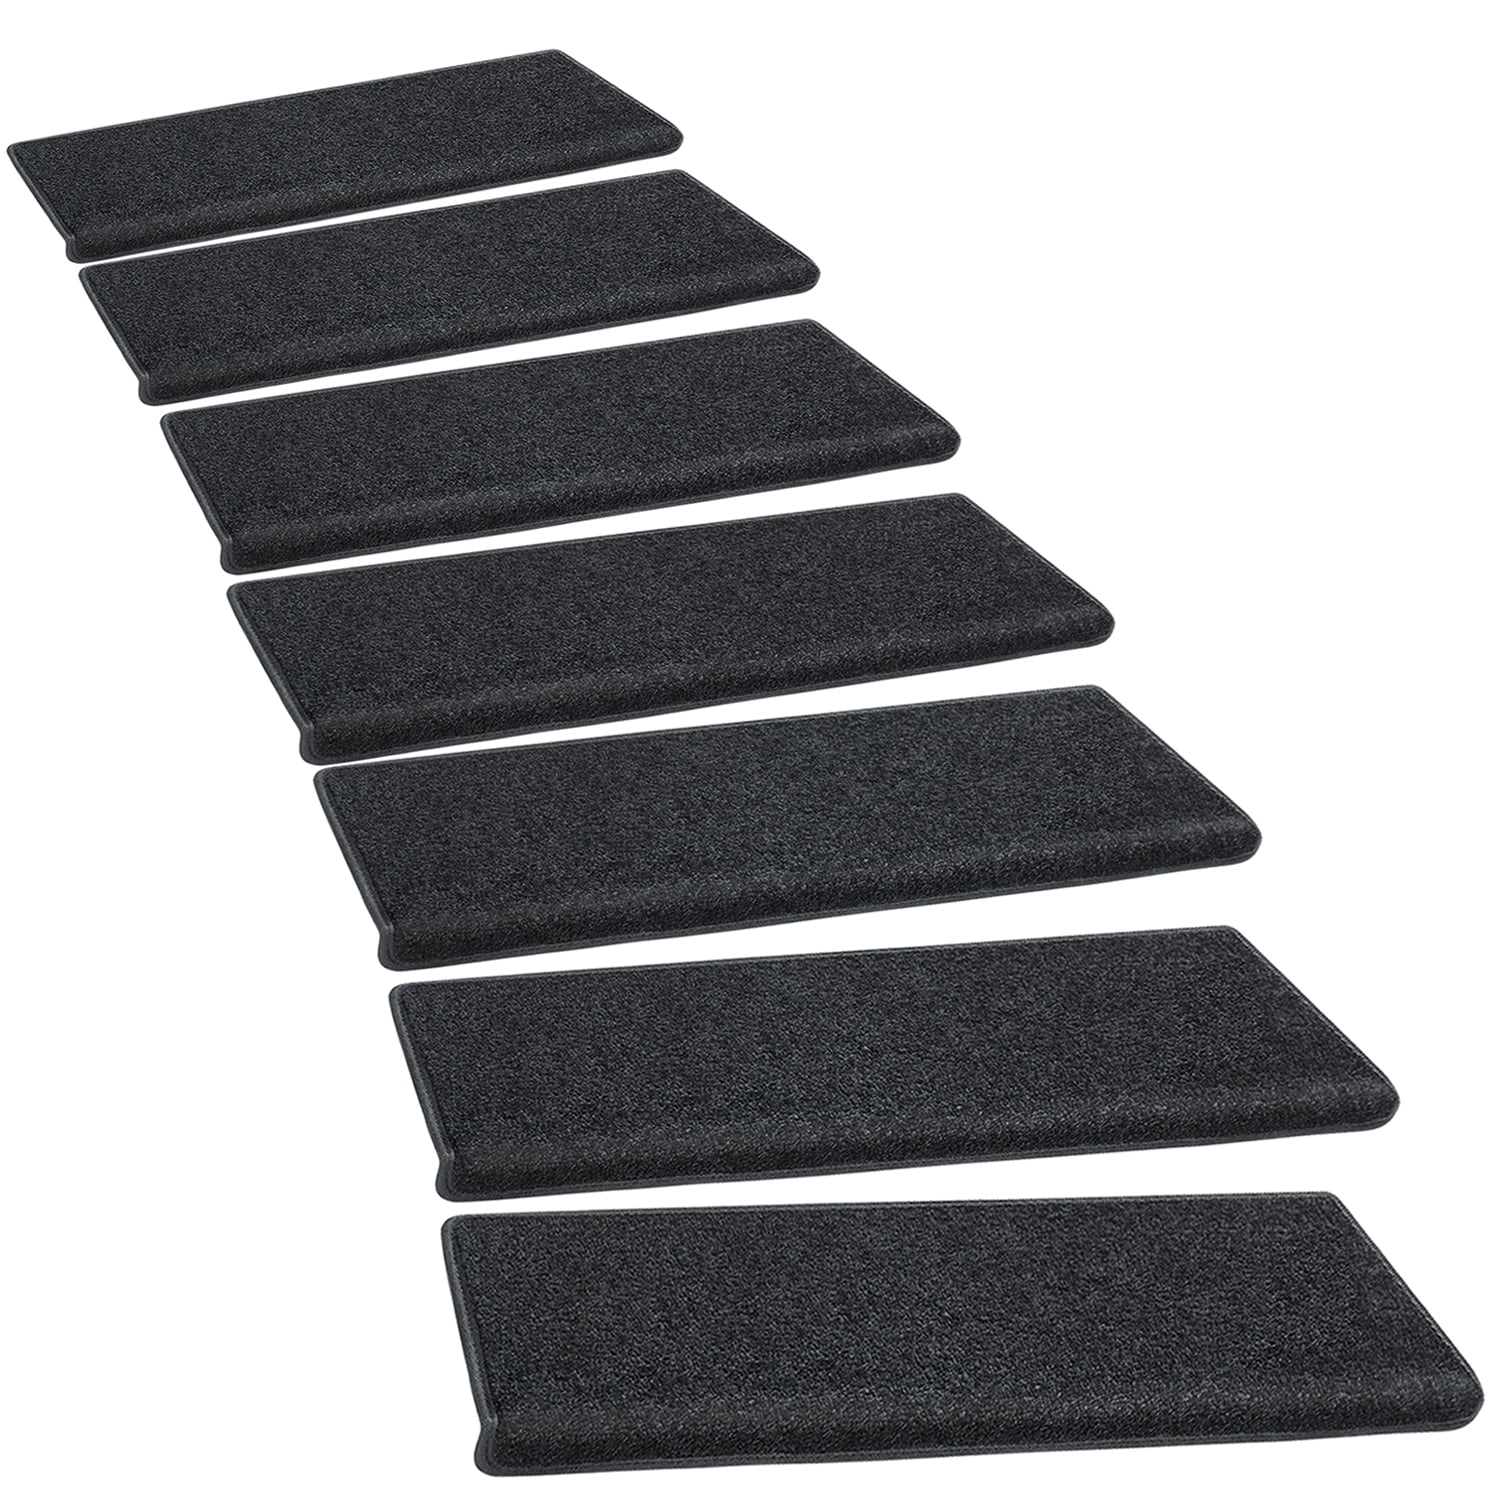 1PC Adhesive Stair Thread Mat Stair Cover Pads Rectangle Carpet Rug Pure Color 